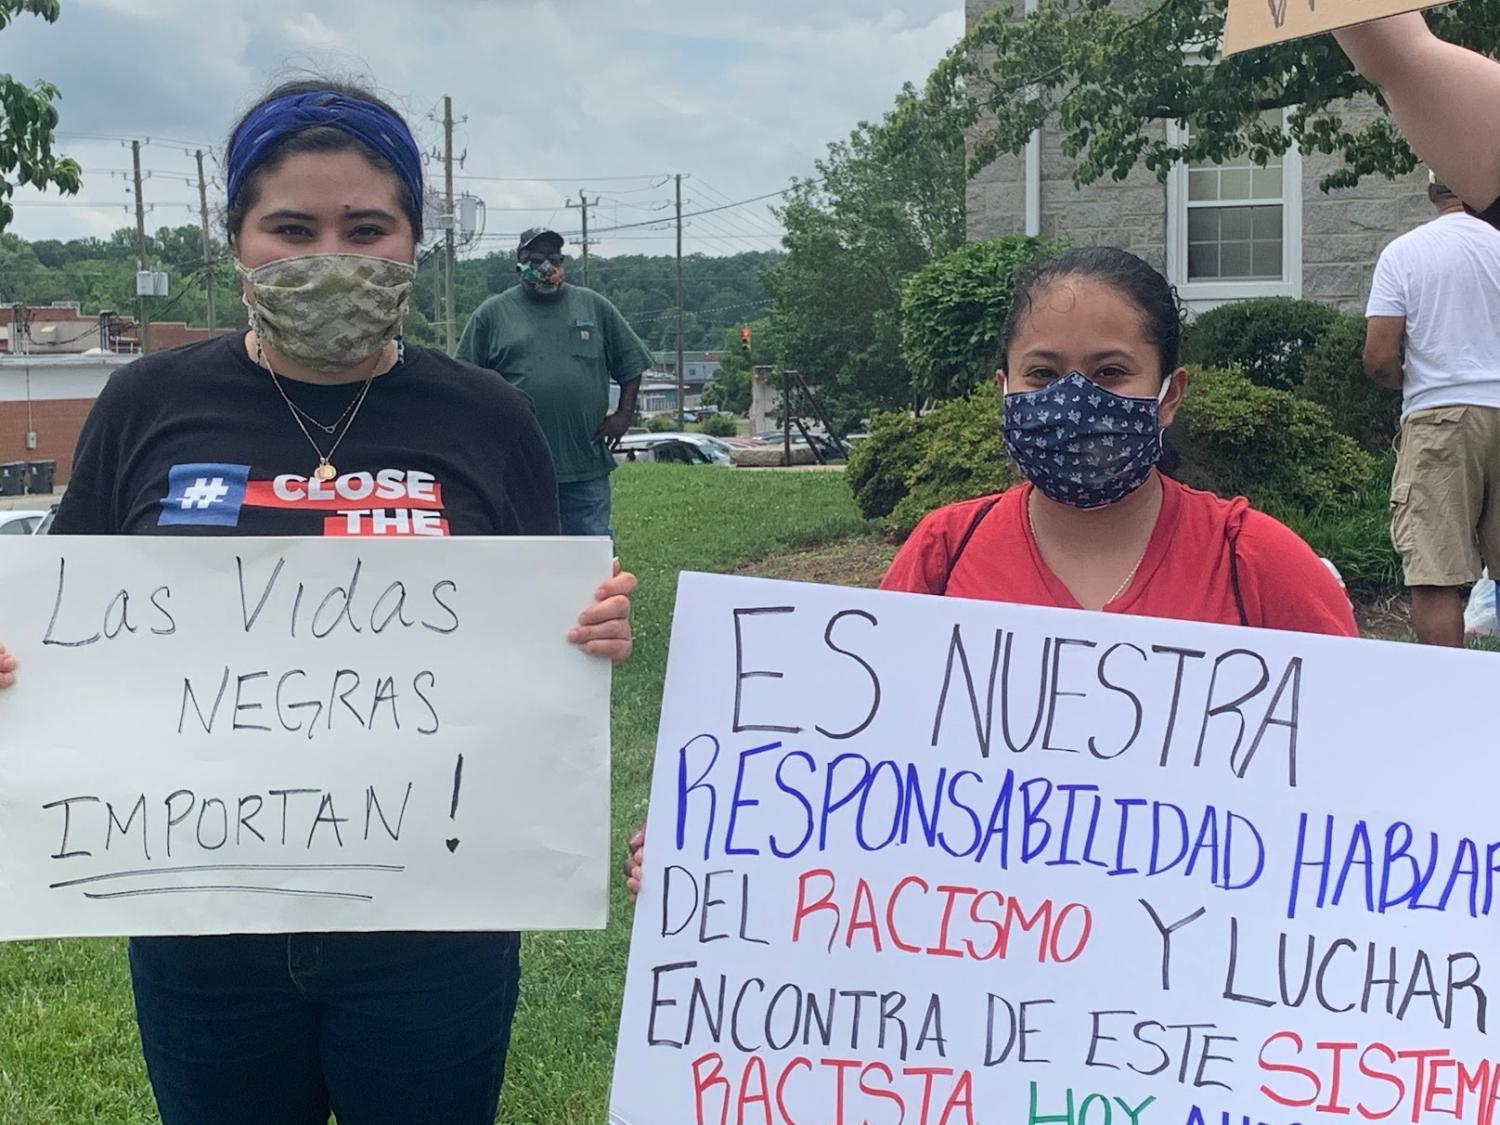 Two protesters stand with signs written entirely in Spanish, showing solidarity from all parts of the Silar City community. June 2020